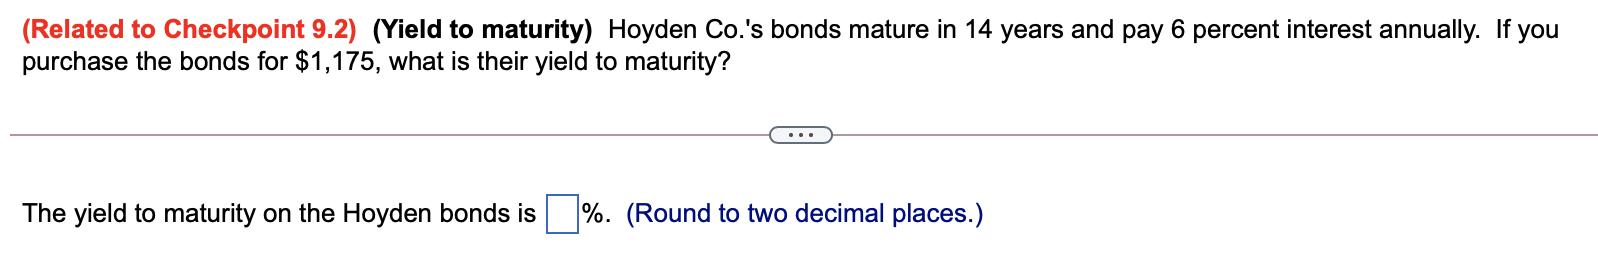 (Related to Checkpoint 9.2) (Yield to maturity) Hoyden Co.s bonds mature in 14 years and pay 6 percent interest annually. If